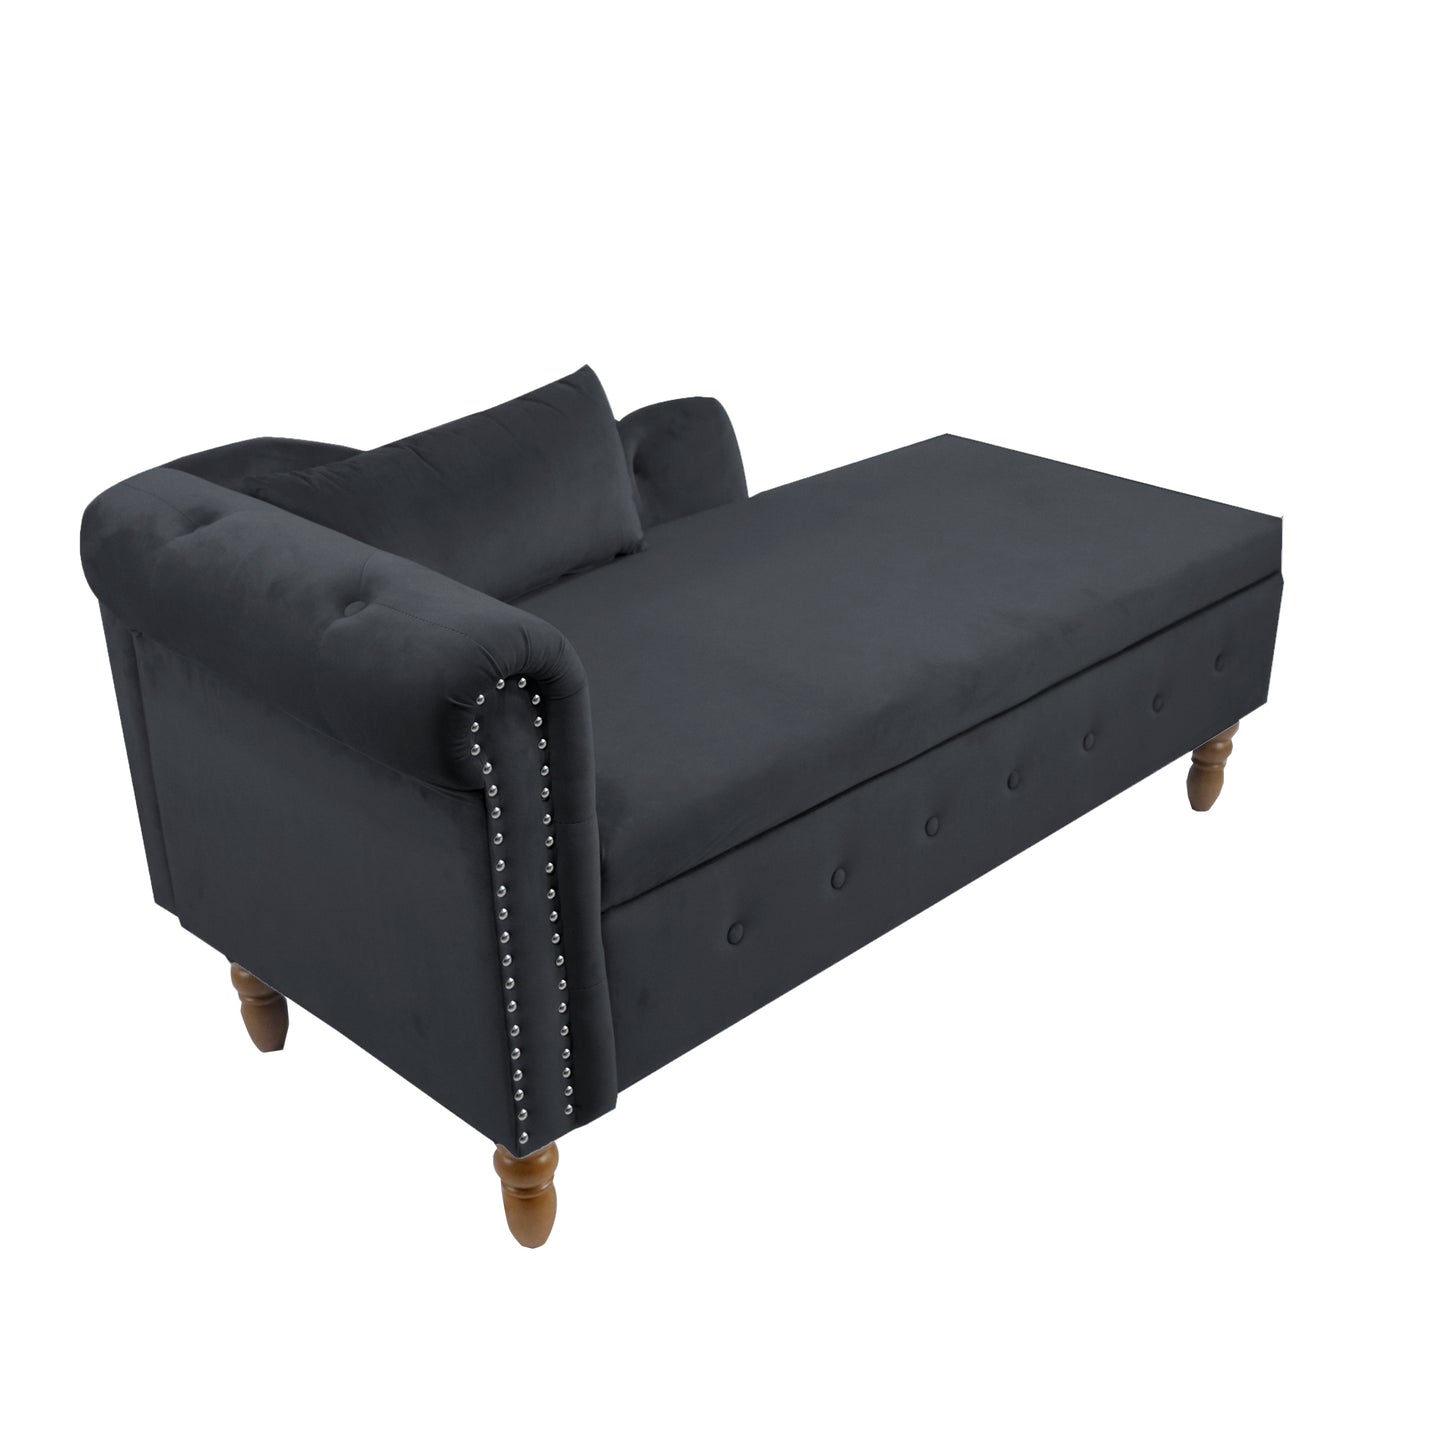 Black Chaise Lounge Indoor, Velvet Lounge Chair for Bedroom with Storage & Pillow, Modern Upholstered Rolled Arm Chase Lounge for Sleeping with Nailhead Trim for Living Room Bedroom Office